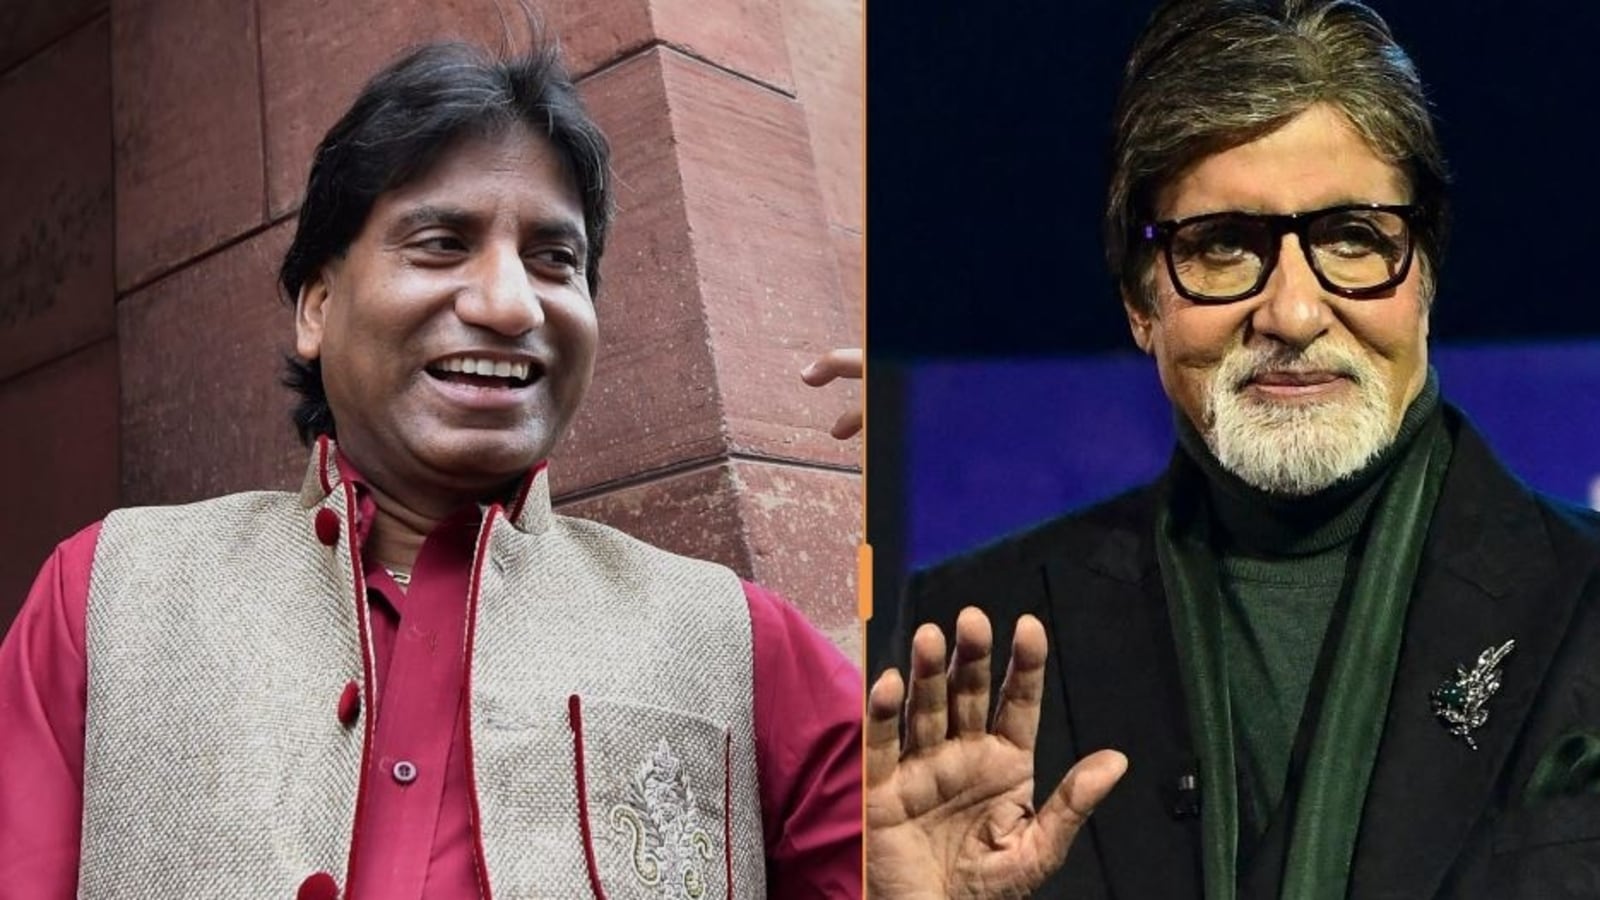 Amitabh Bachchan confirms he sent a note for Raju Srivastava: ‘He opened his eye a bit, and then went away’